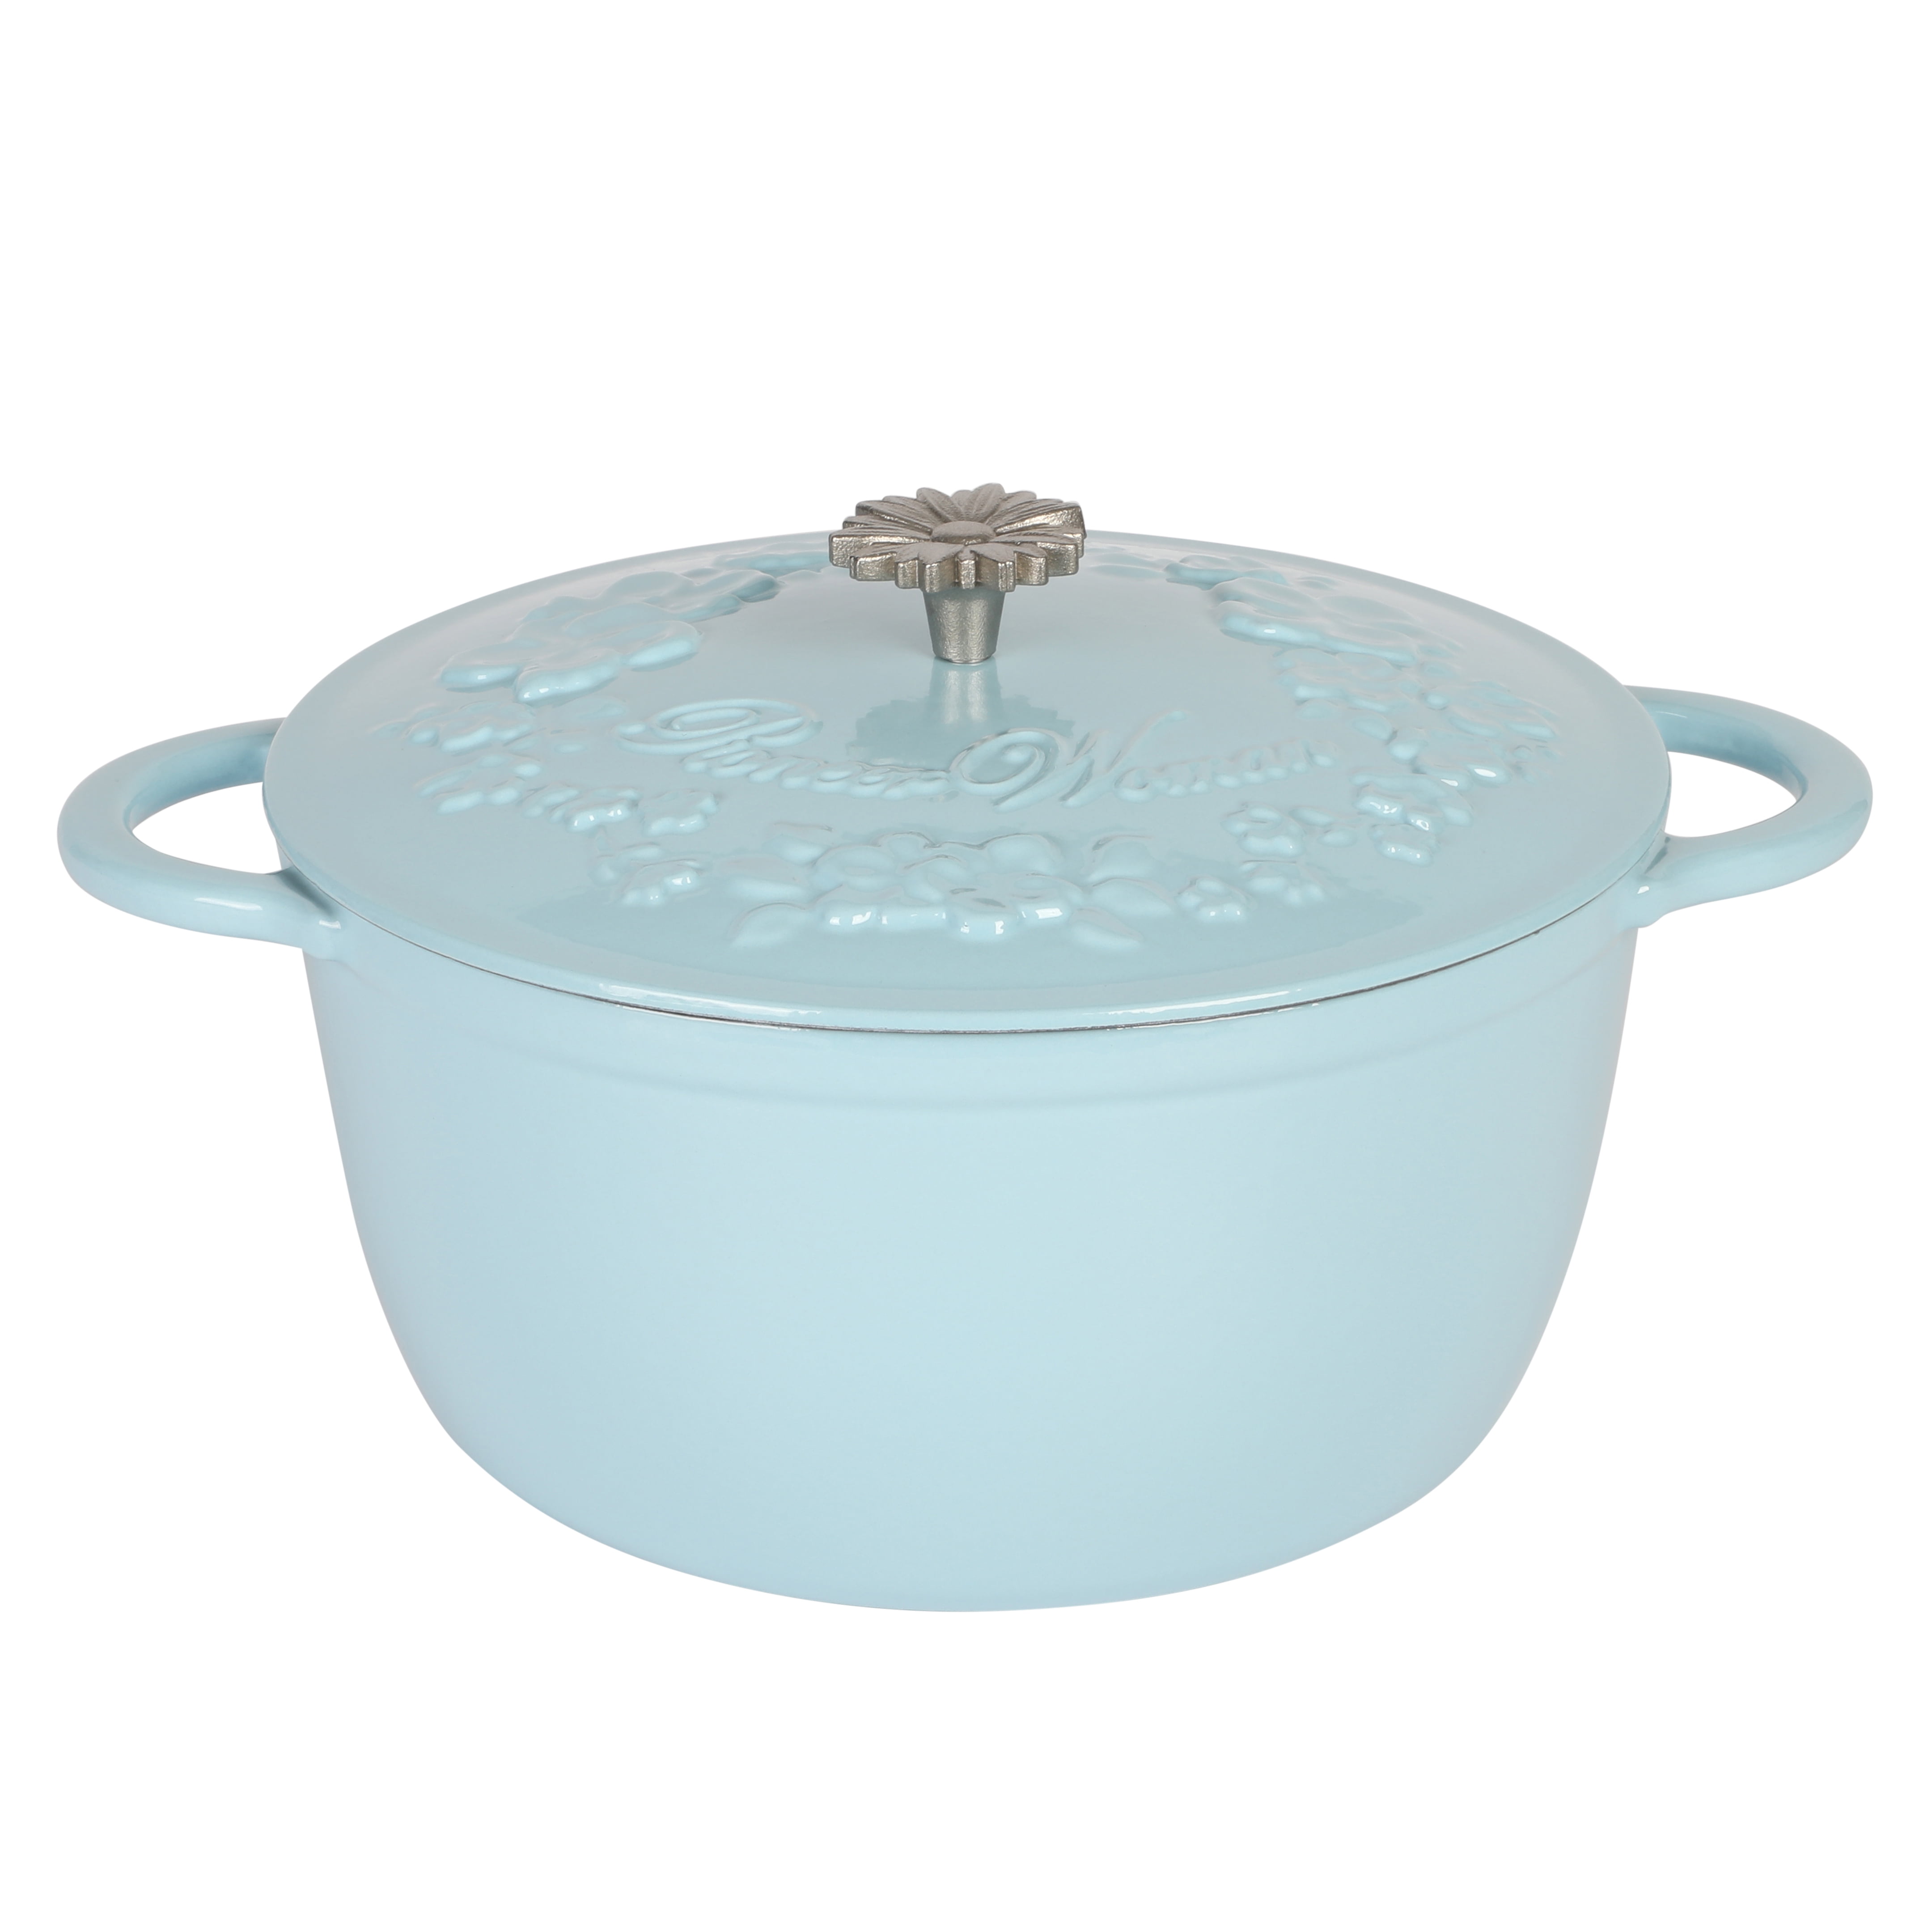 The Pioneer Woman Timeless Beauty Cast Iron 5-Quart Dutch Oven, Turquoise 